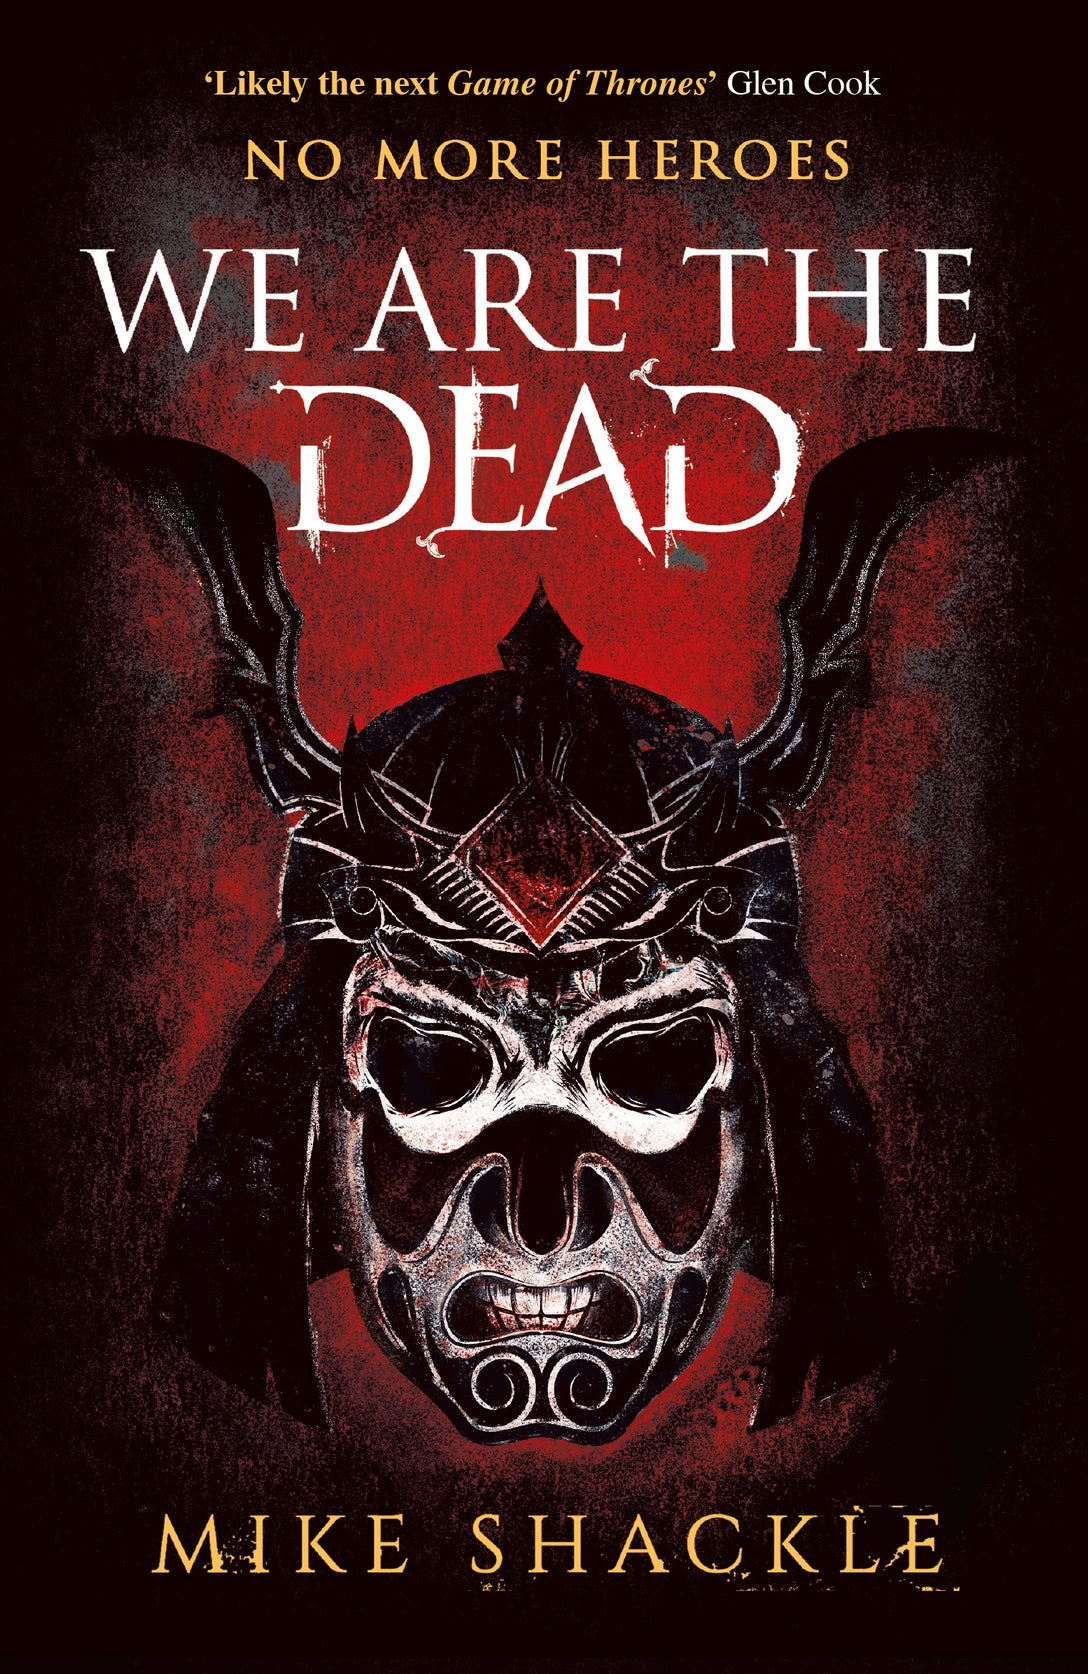 We Are The Dead by Mike Shackle